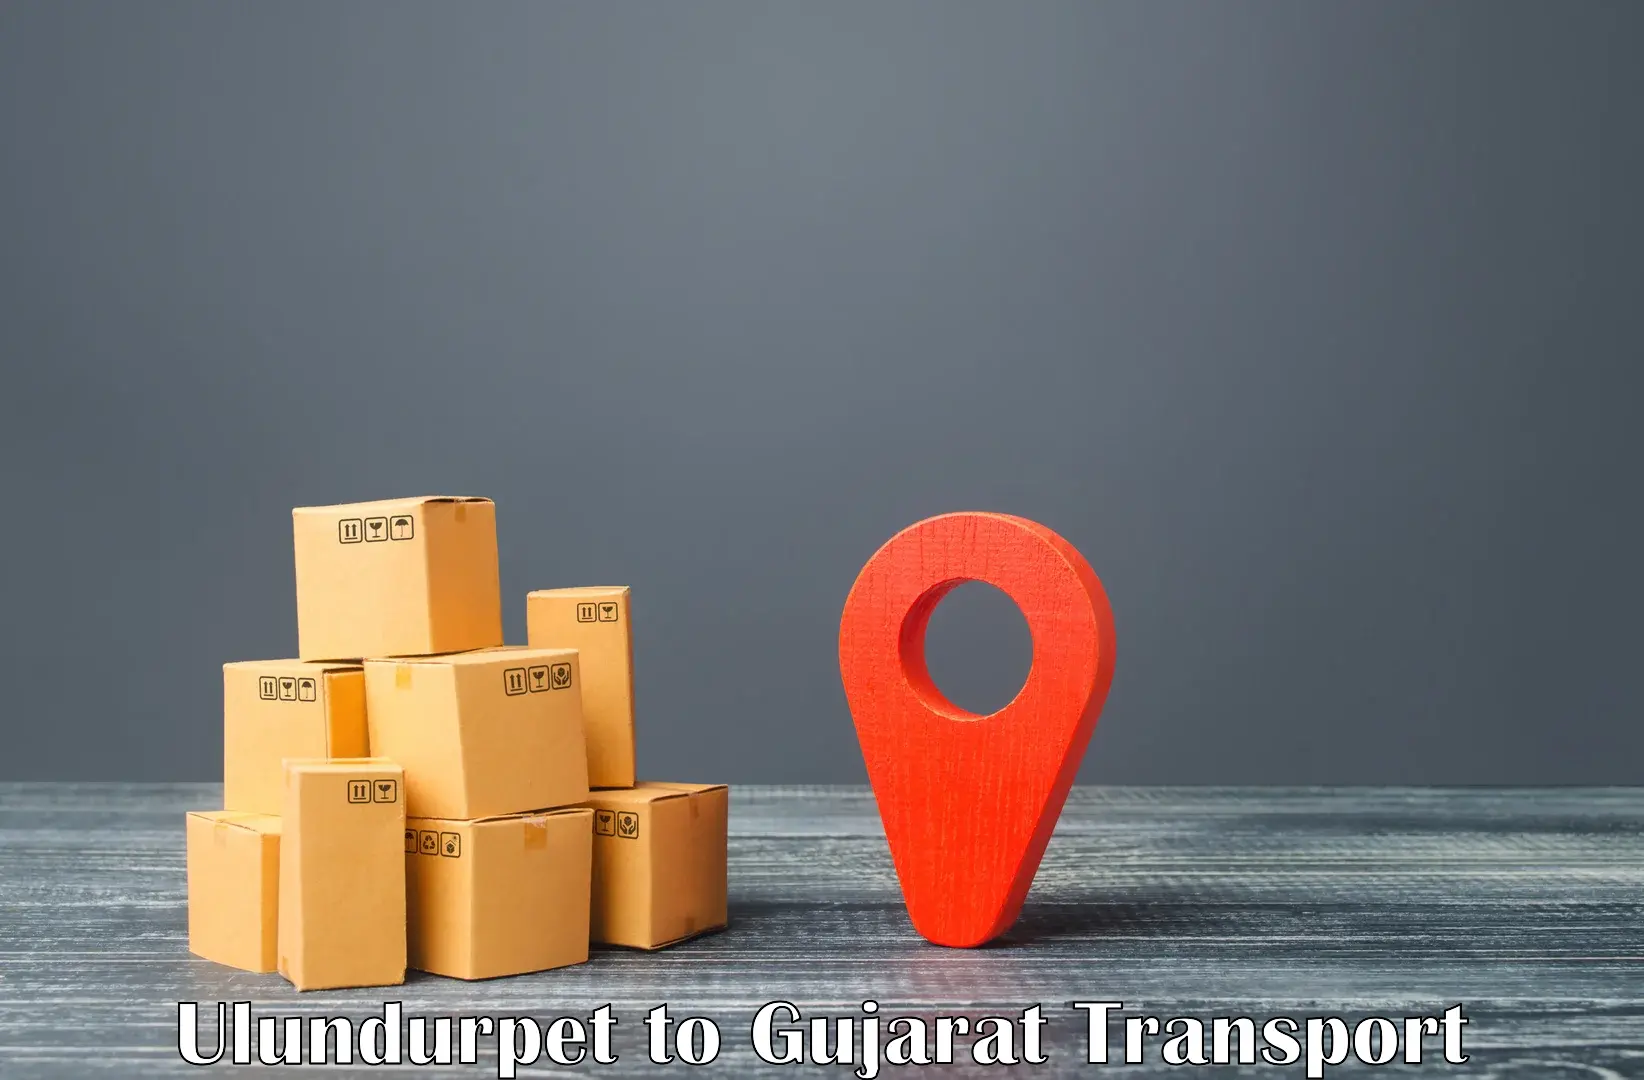 Transport services Ulundurpet to Godhra